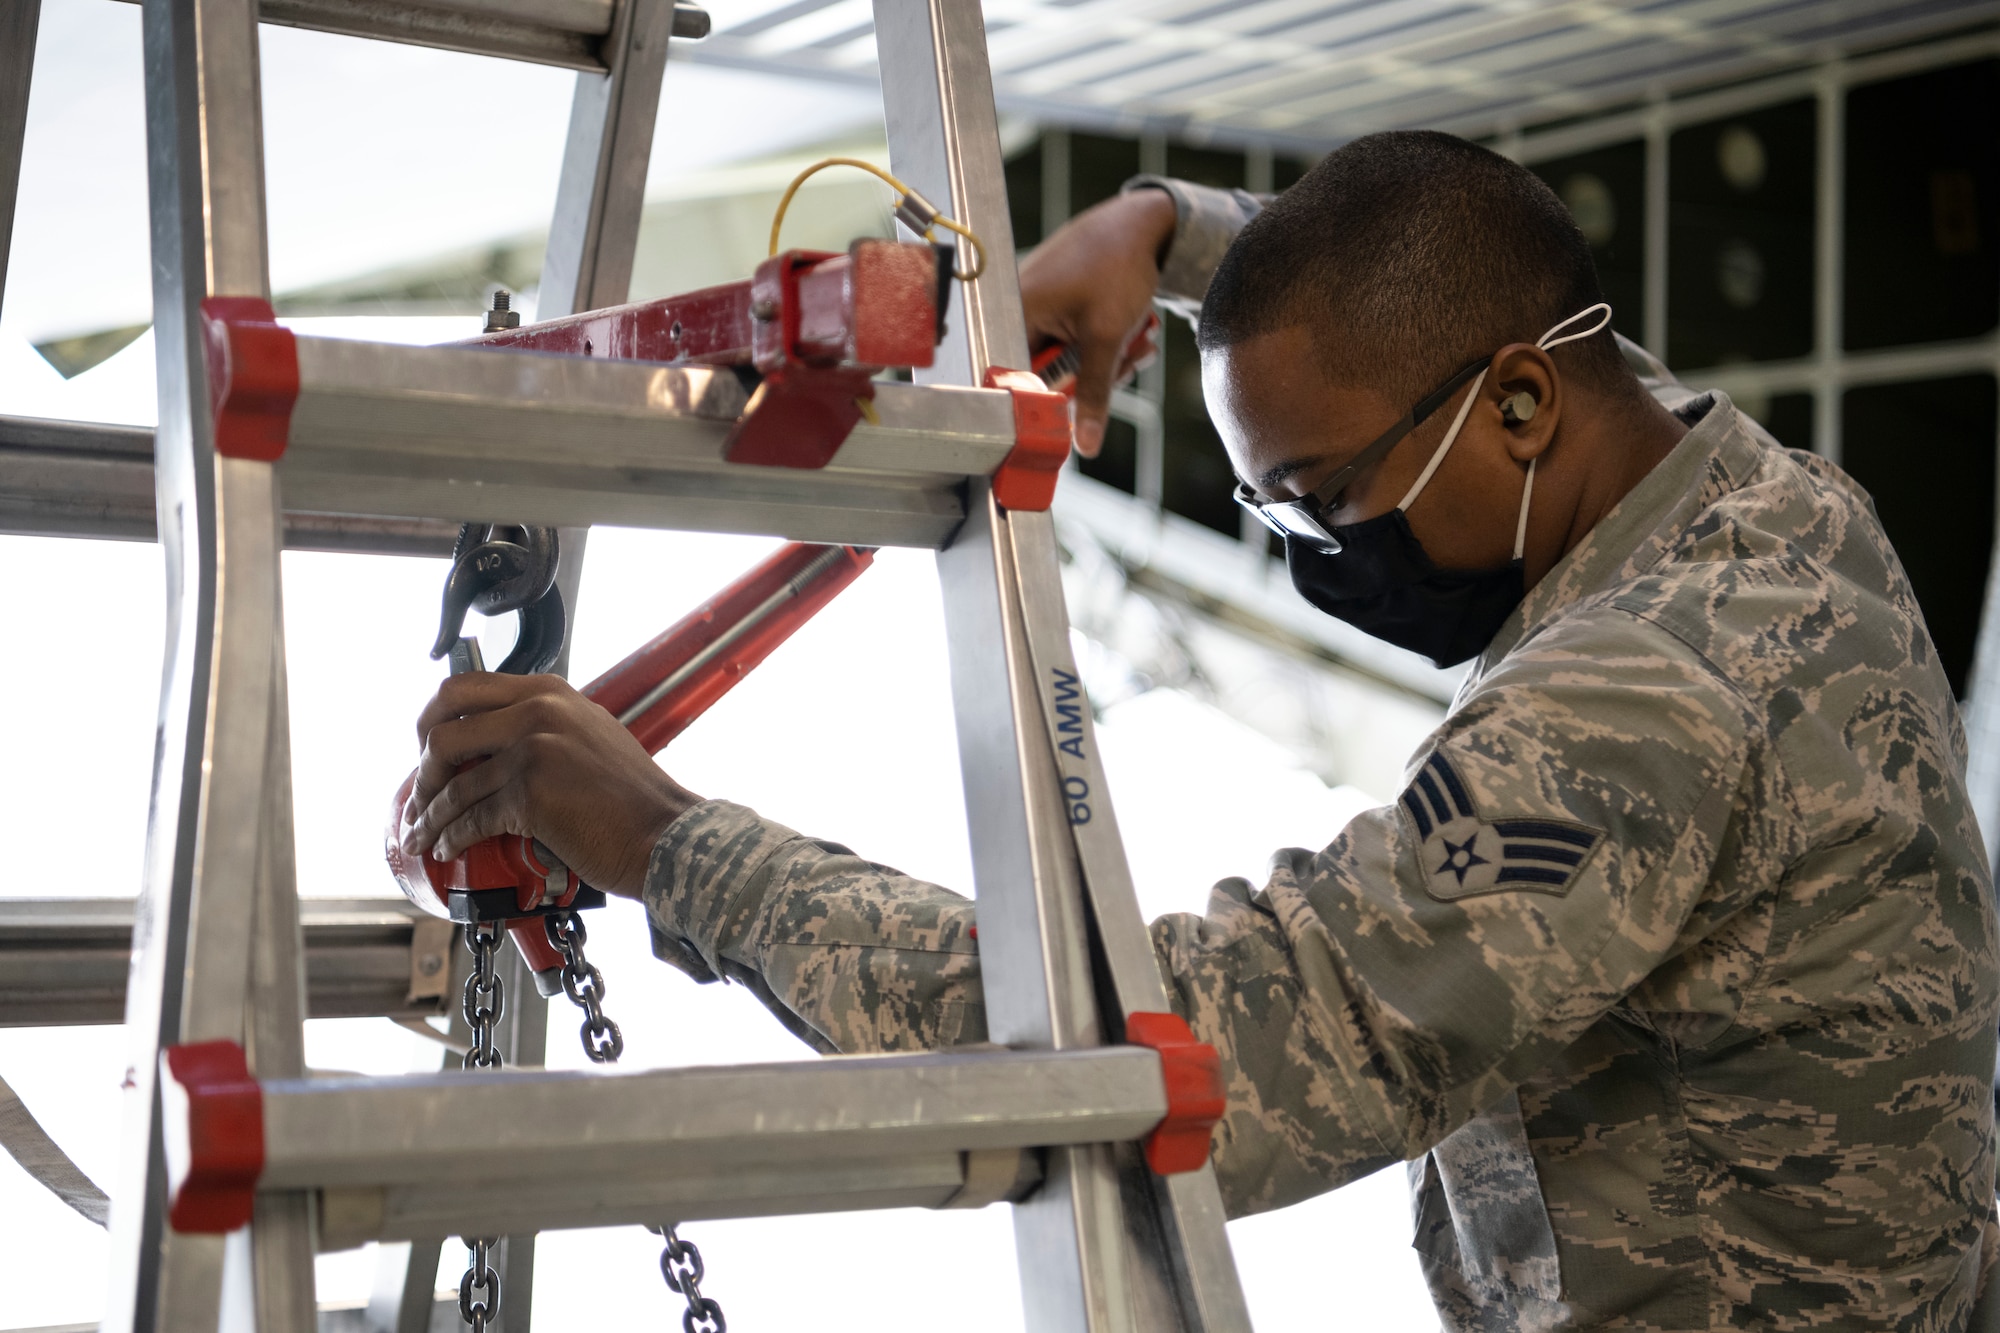 Senior Airman Saajaadeen Jeffries, 60th Aircraft Maintenance Squadron crew chief, lowers a cargo winch on a C-5M Super Galaxy March 18, 2021, at Travis Air Force Base, California. Travis Airmen collaborated with the Air Staff Logistics Directorate’s Tesseract team and key partners from the C-5 program office to implement commercial maintenance practices in scheduling and completing maintenance around flying demands. (U.S. Air Force photo by Airman 1st Class Alexander Merchak)